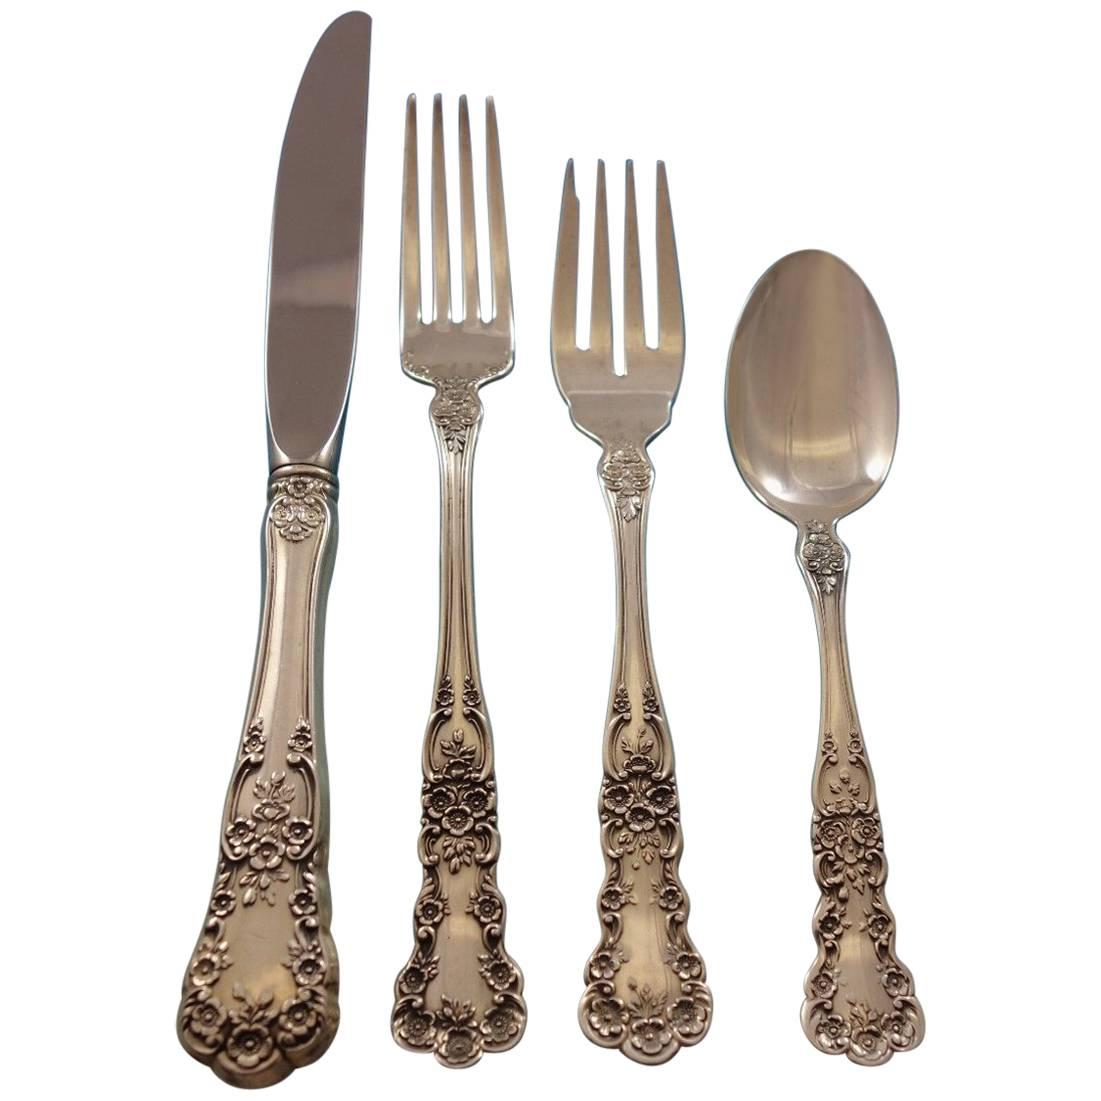 Buttercup by Gorham Sterling Silver Flatware Set Place Size 8 Service 32 Pieces 